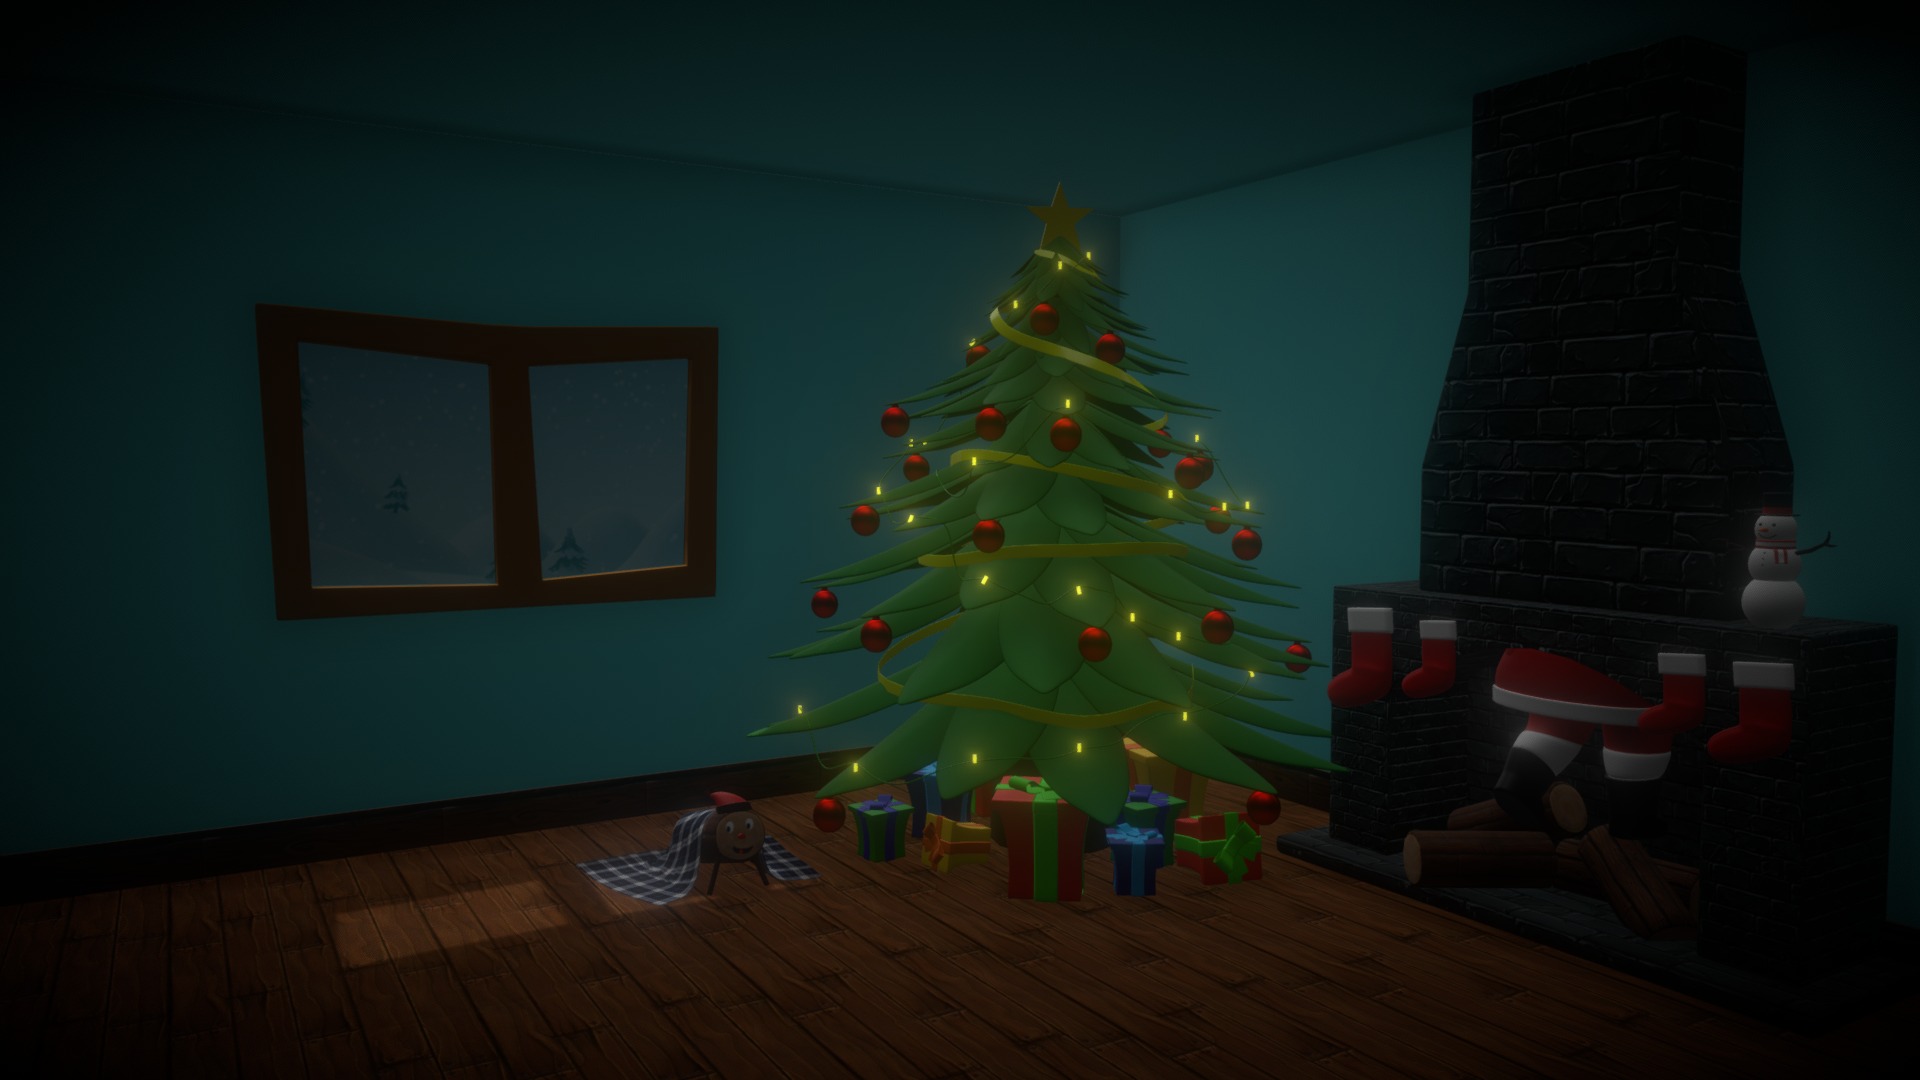 Cartoon Room on Christmas.
Made in 3DS MAX - Christmas room - 3D model by Gmanresa 3d model